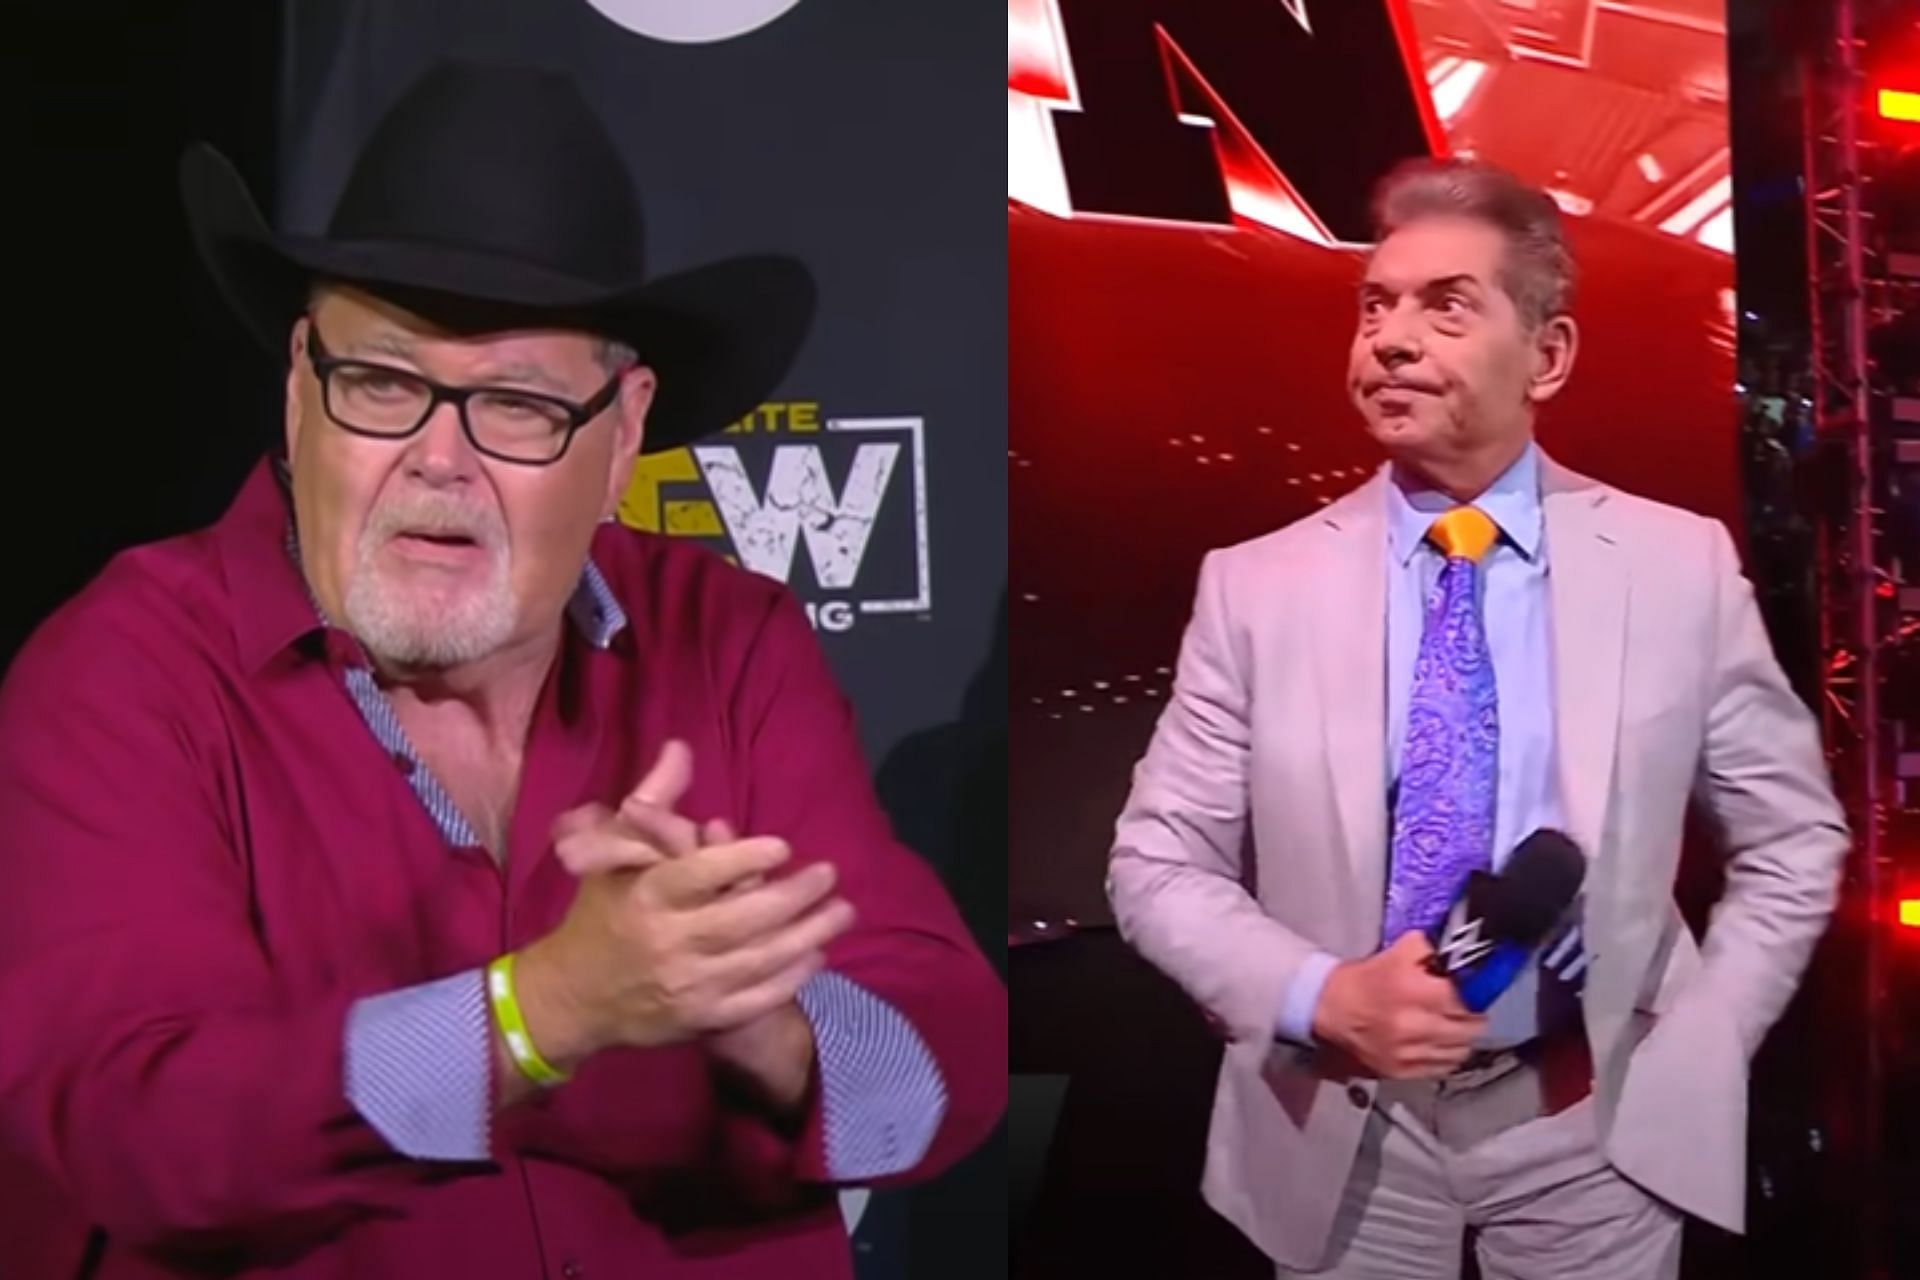 Jim Ross talks about a WWE HOF induction that could happen with Vince gone [Image Source: AEW Youtube and WWE Youtube]